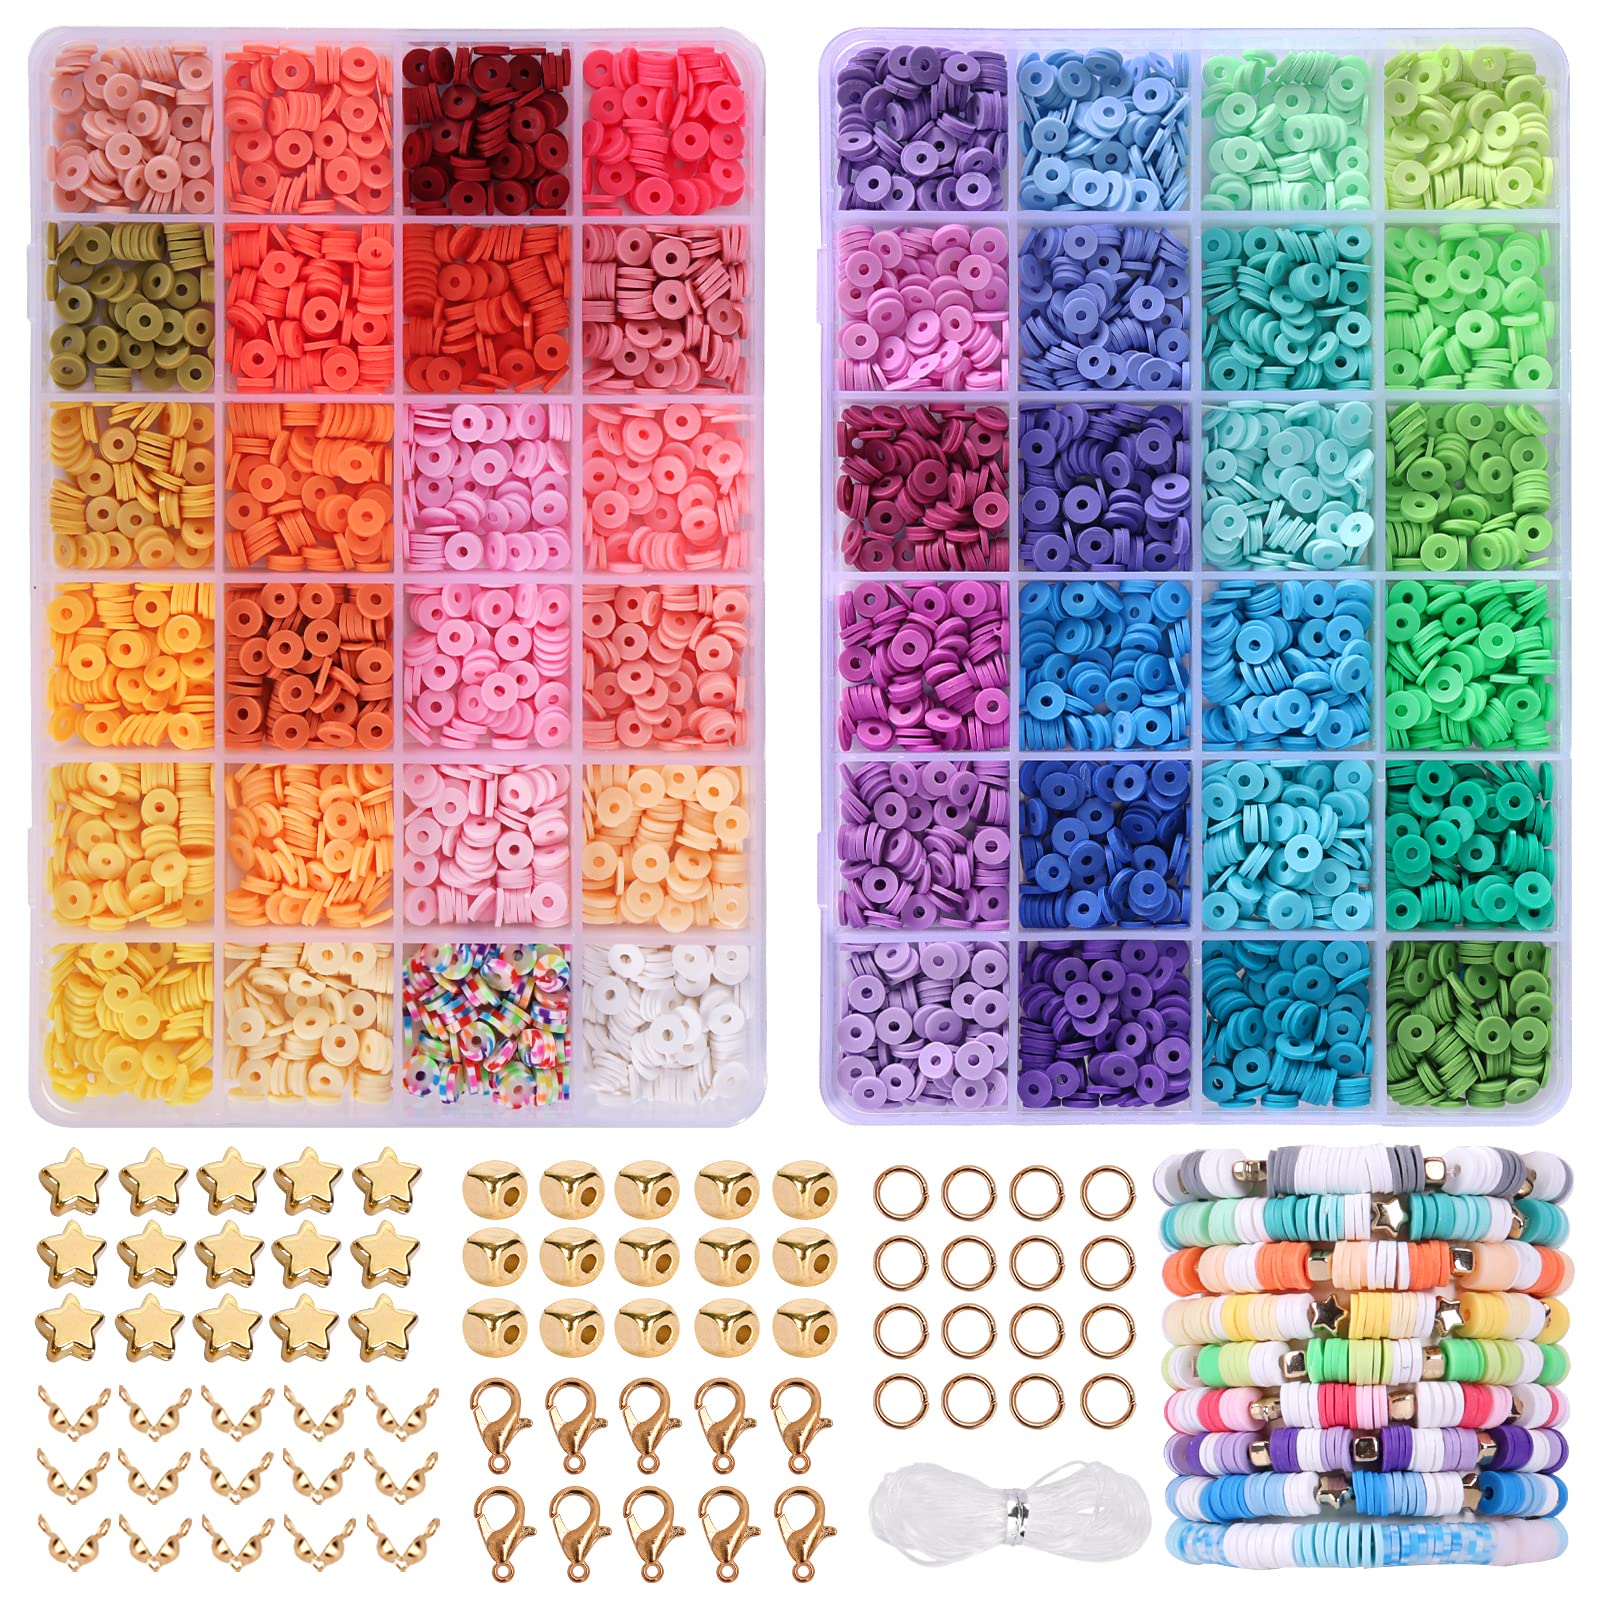 6mm Polymer Clay Round Beads,10 Beads in a Pack